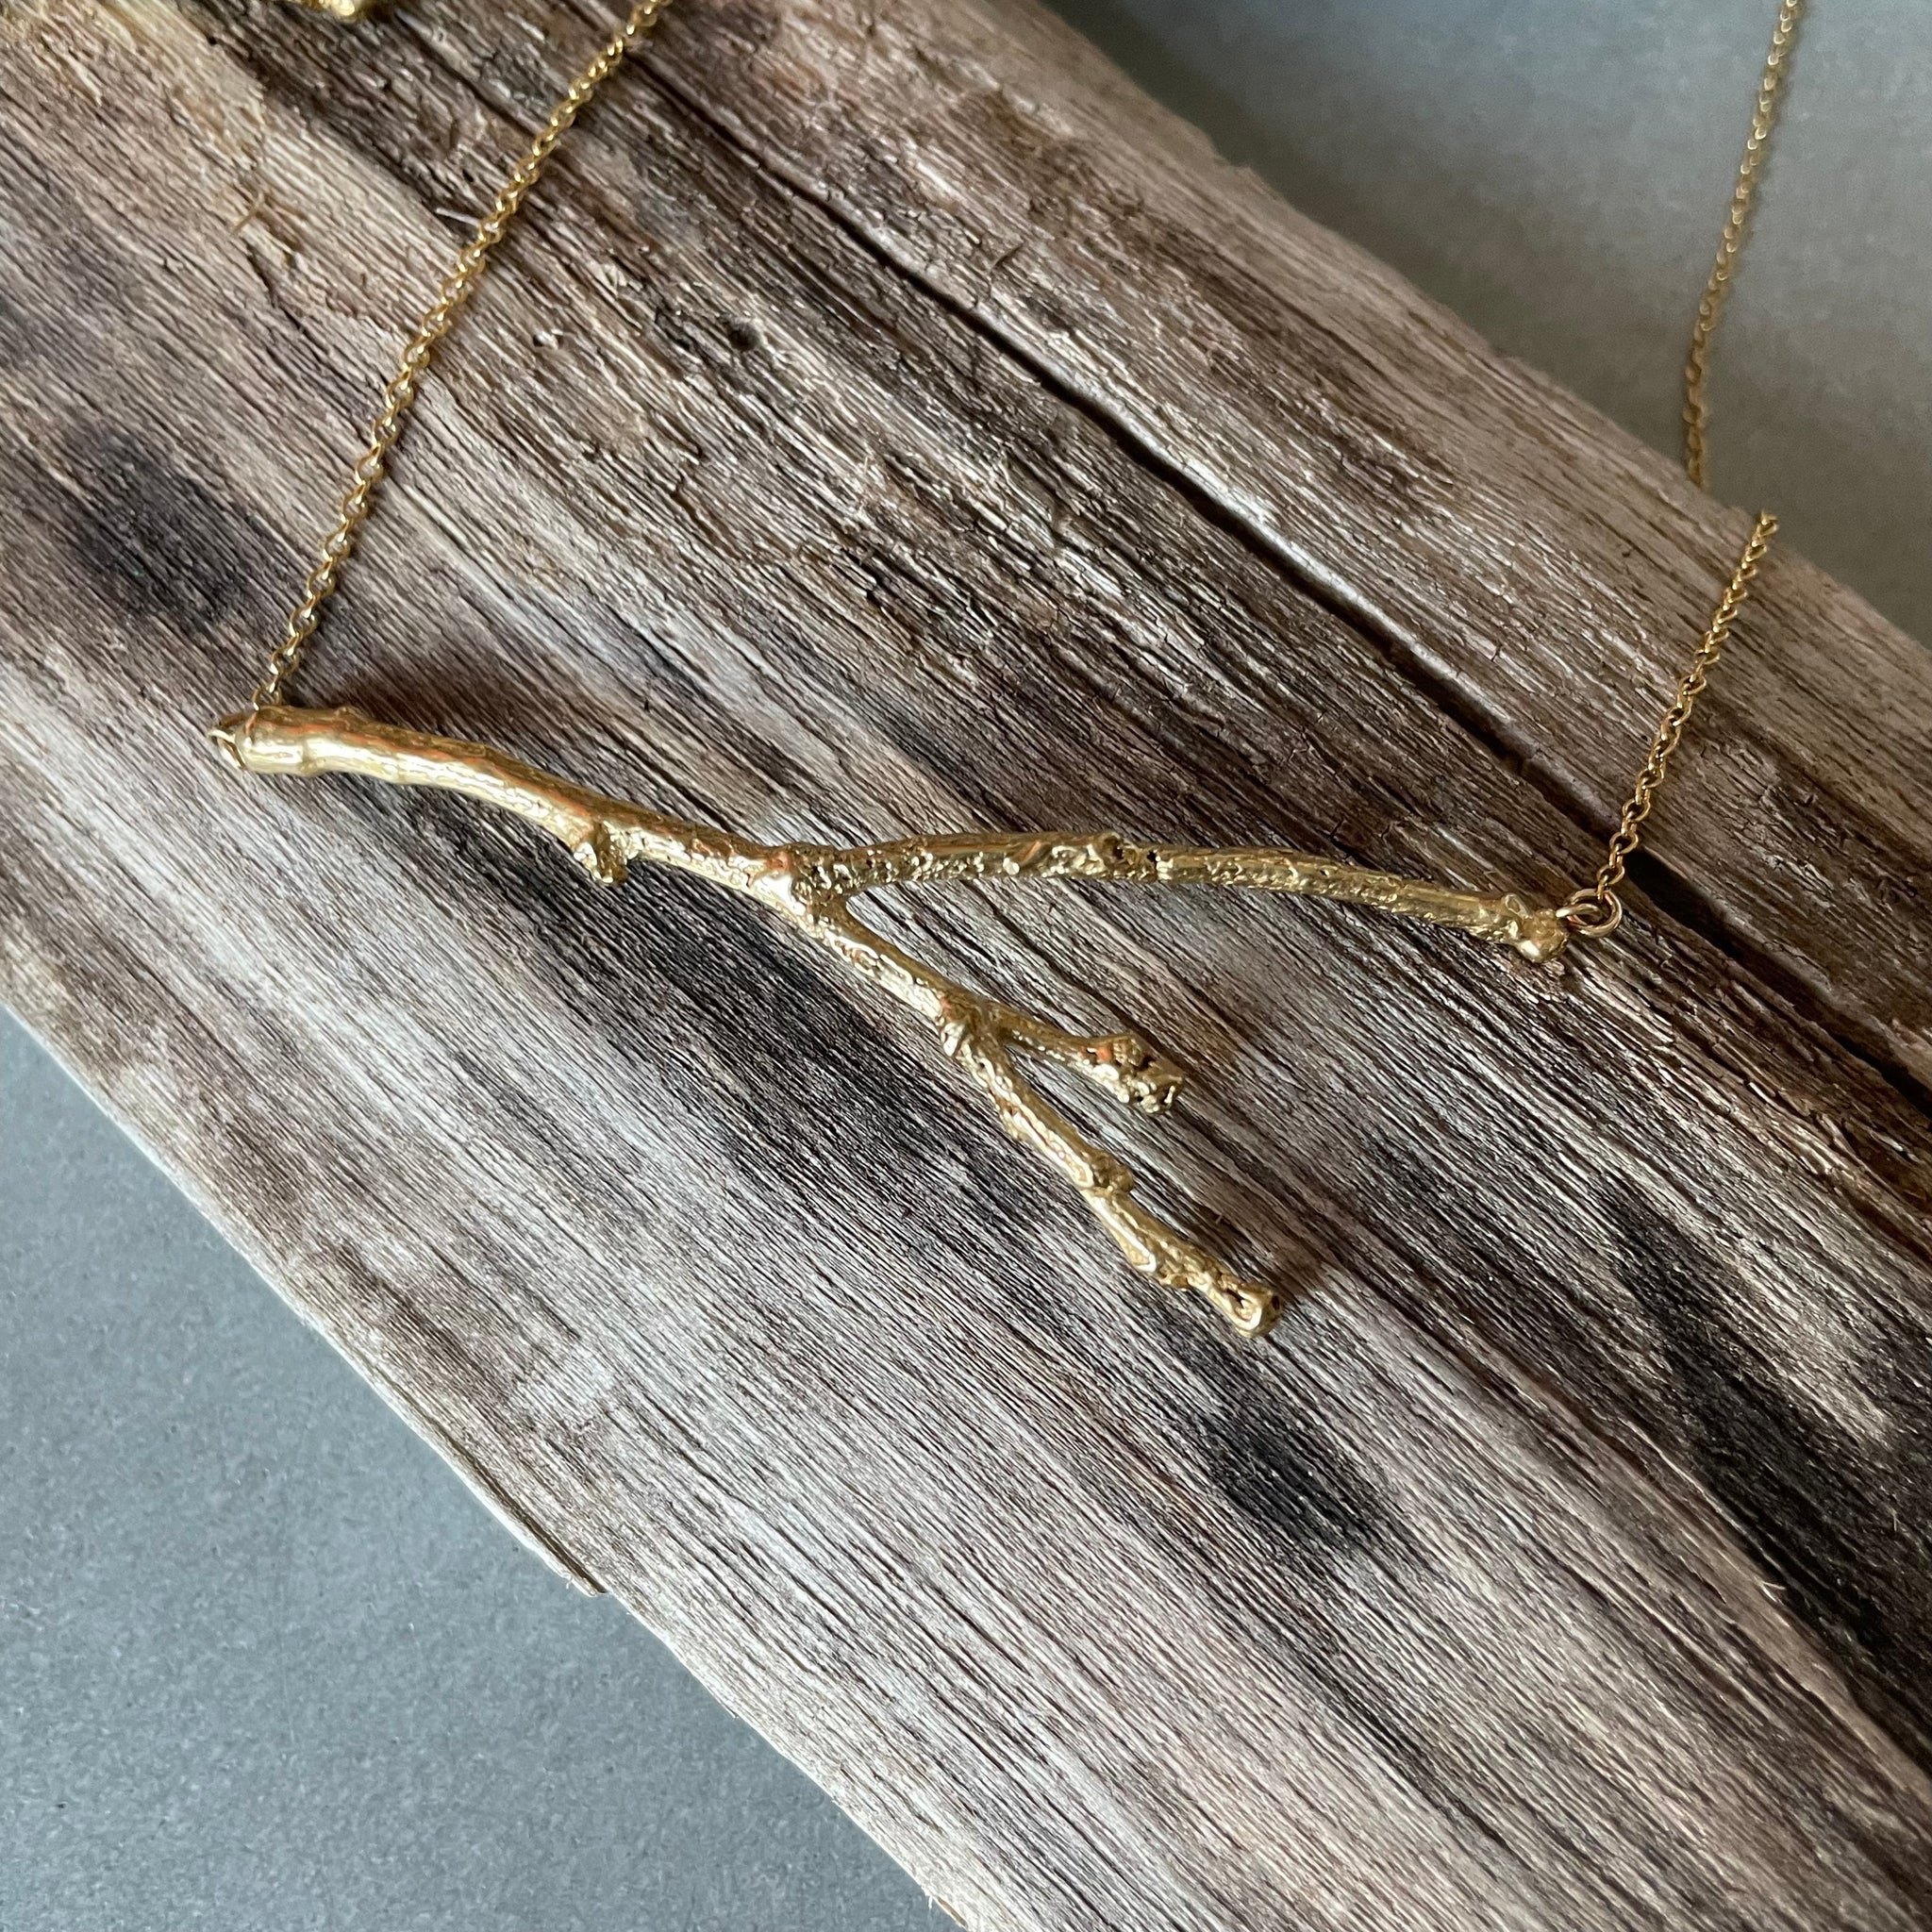 18” Twig Necklace in Gold Vermeil by Tree Trunk Arts